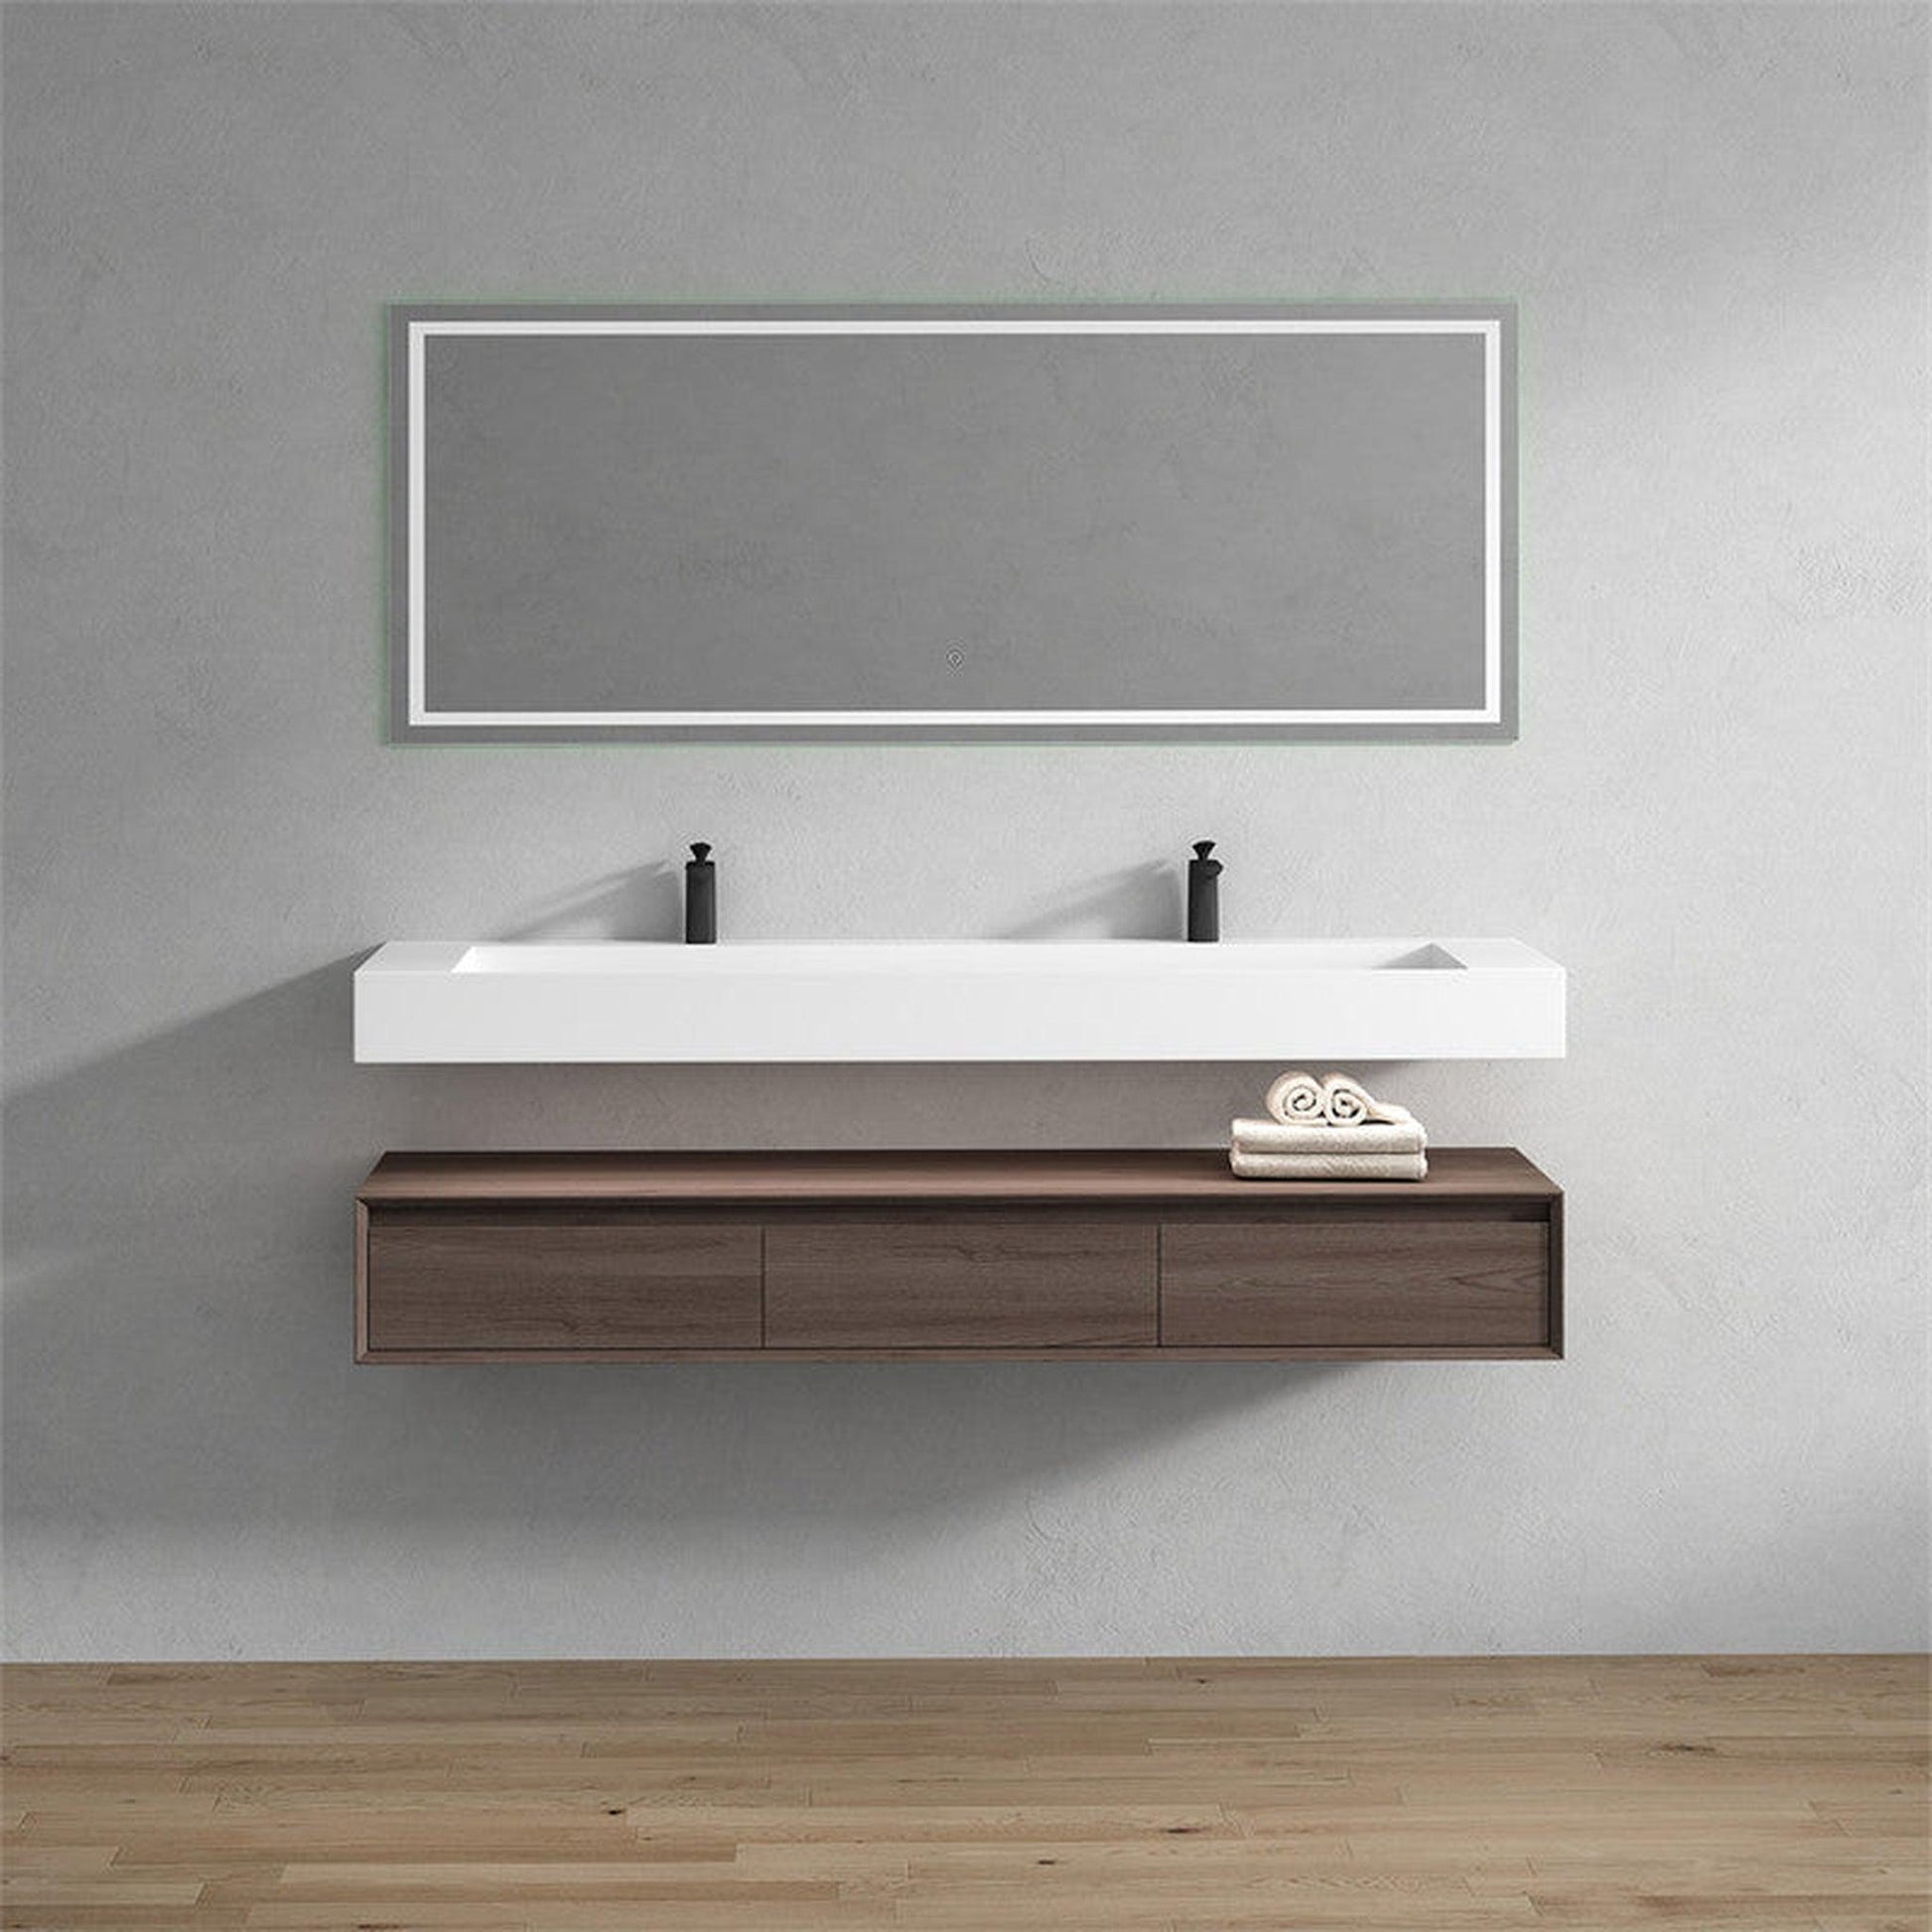 Moreno Bath ALYSA 72" Red Oak Floating Vanity With Double Faucet Holes and Reinforced White Acrylic Sink